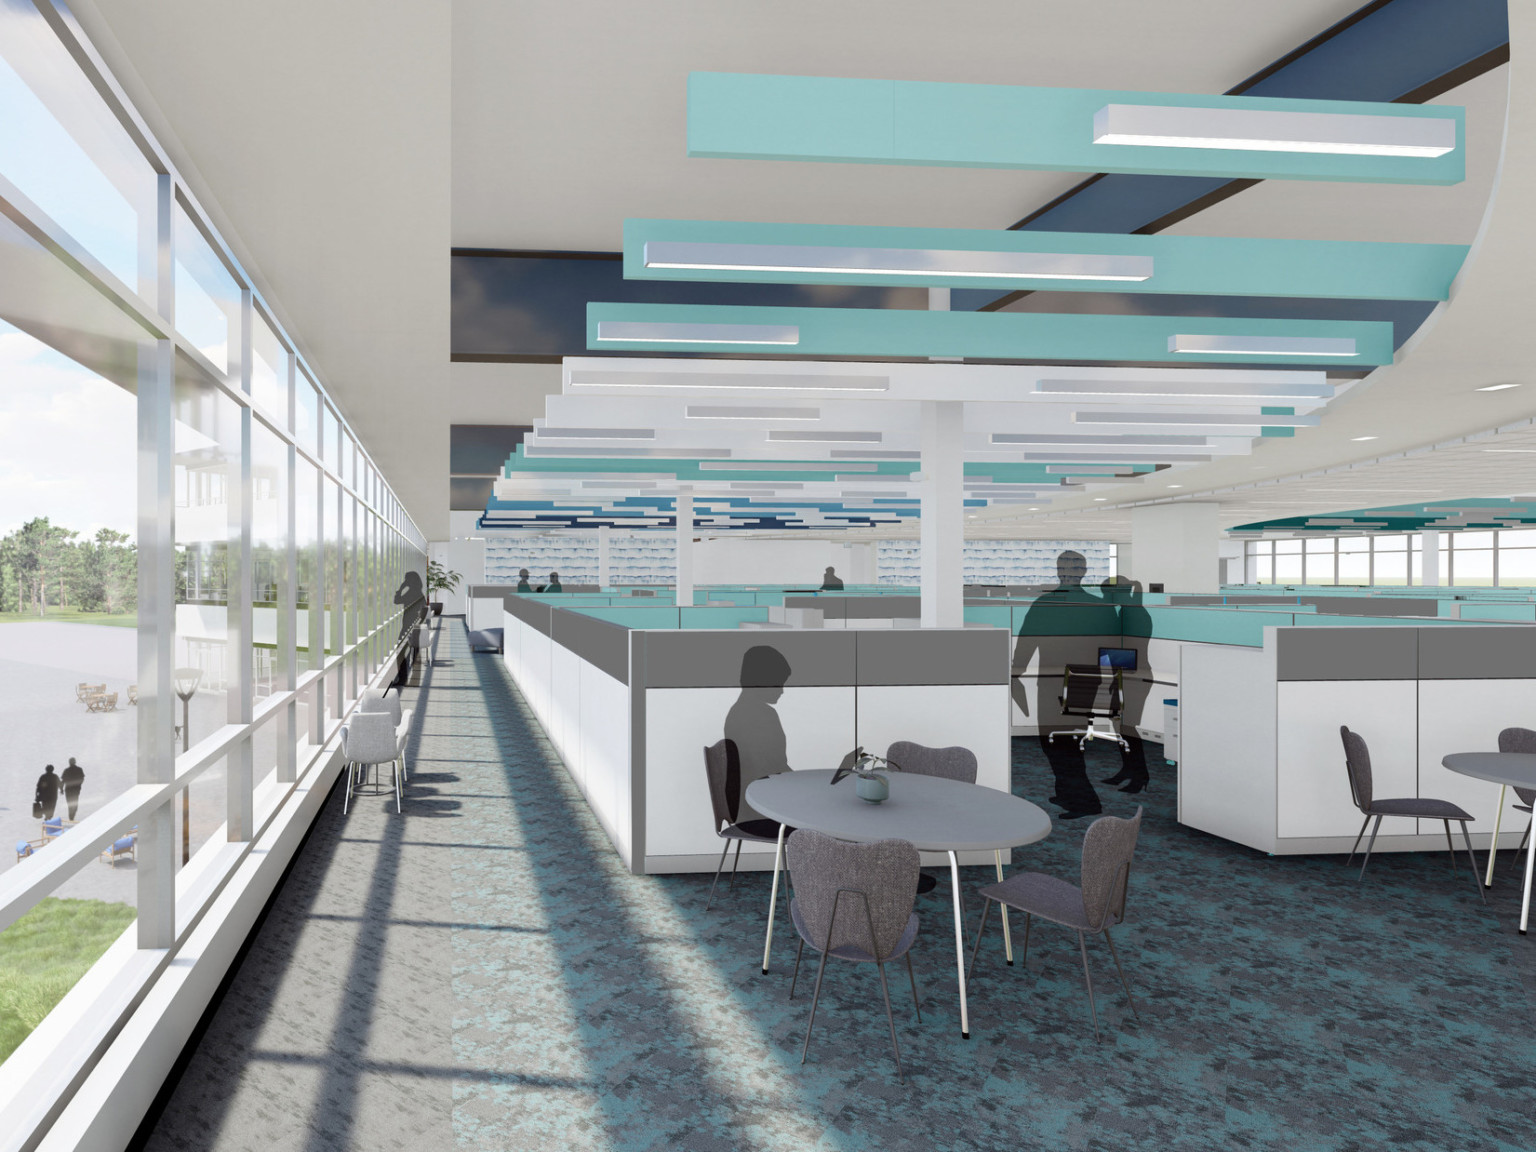 Upper level open plan office with cubicles, right, and floor to ceiling windows facing water, left. Slat ceiling details